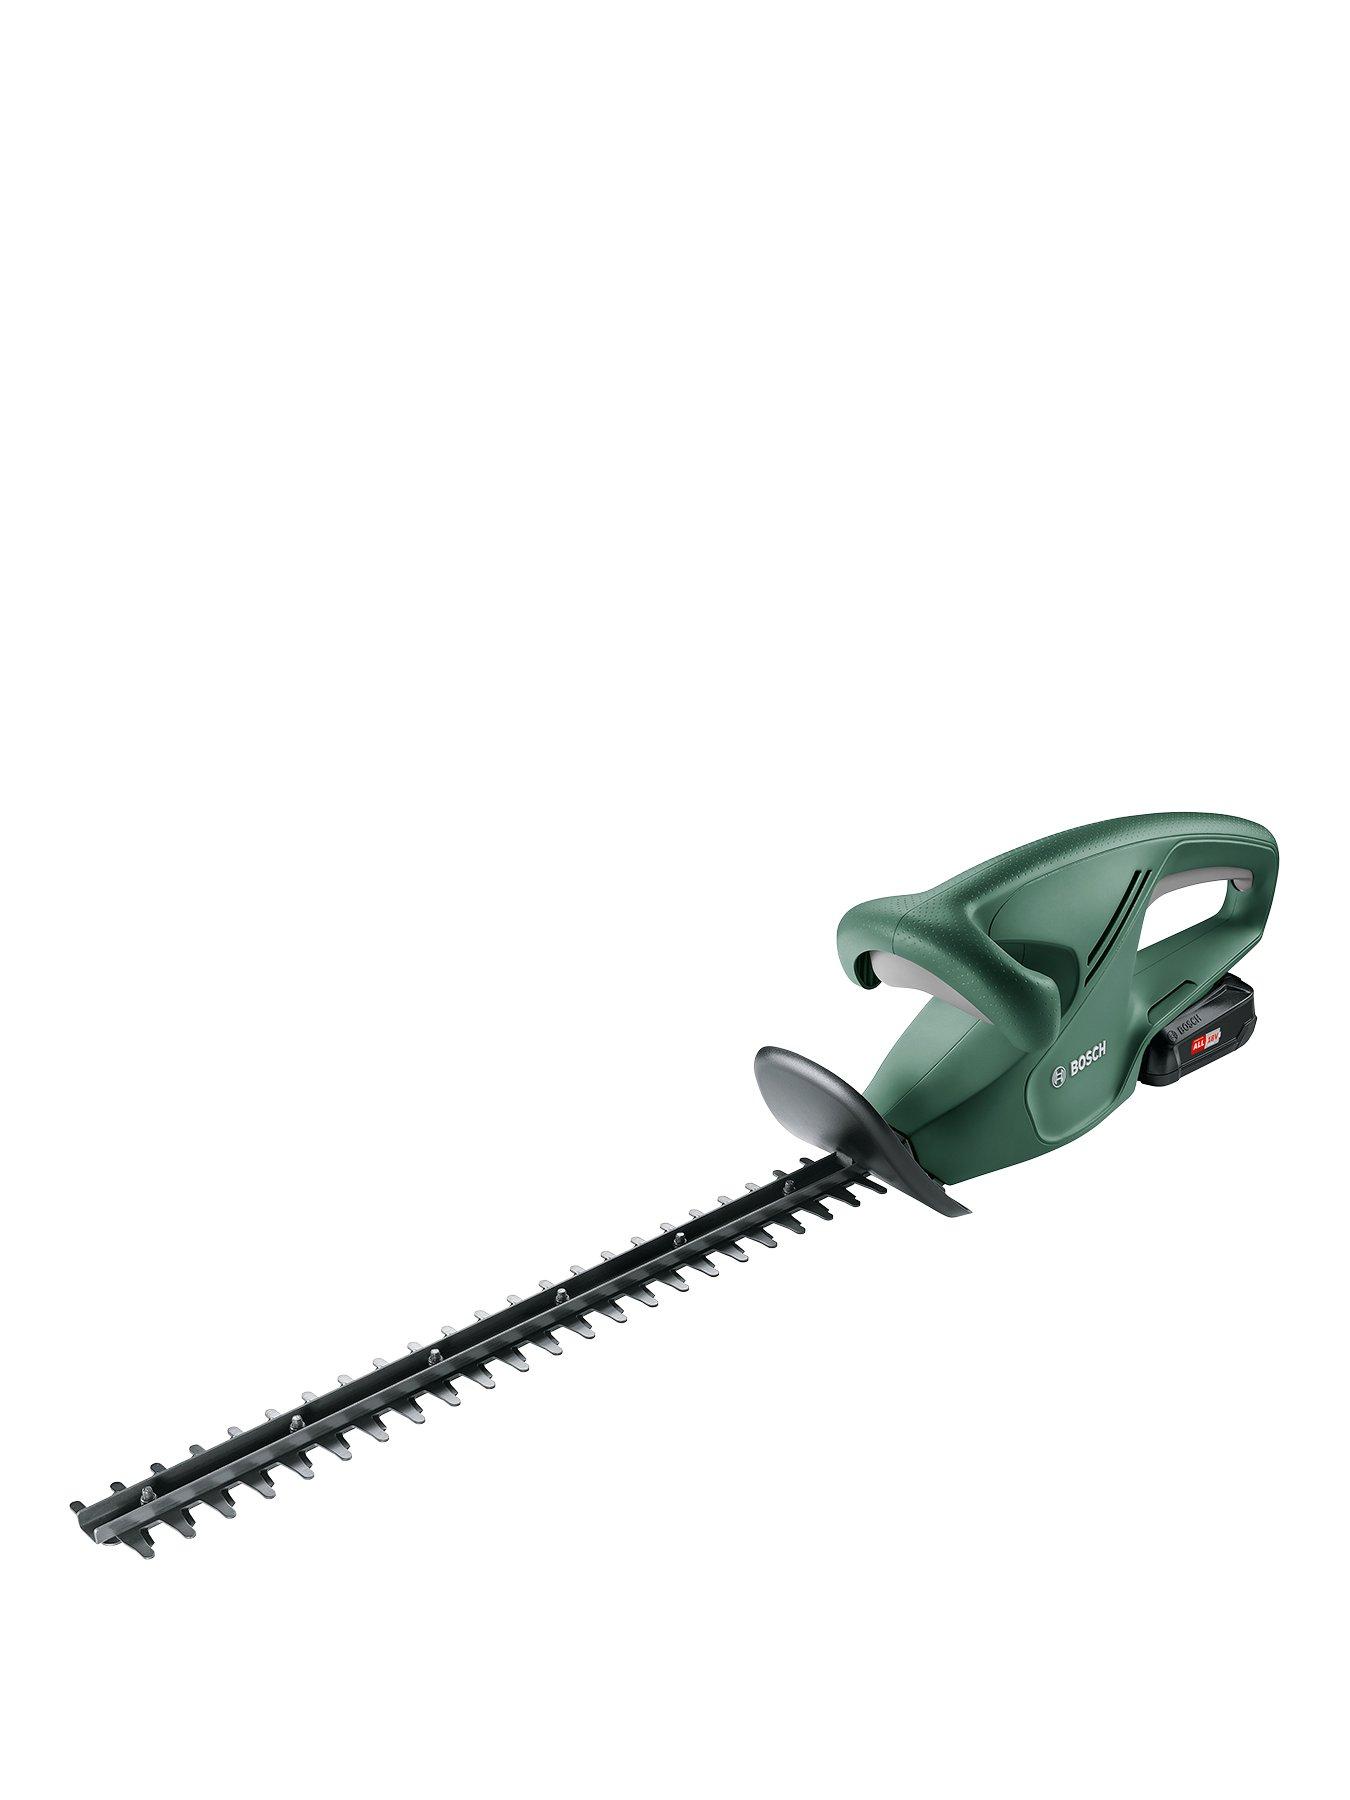 bosch isio cordless shape & edge hedge trimmer